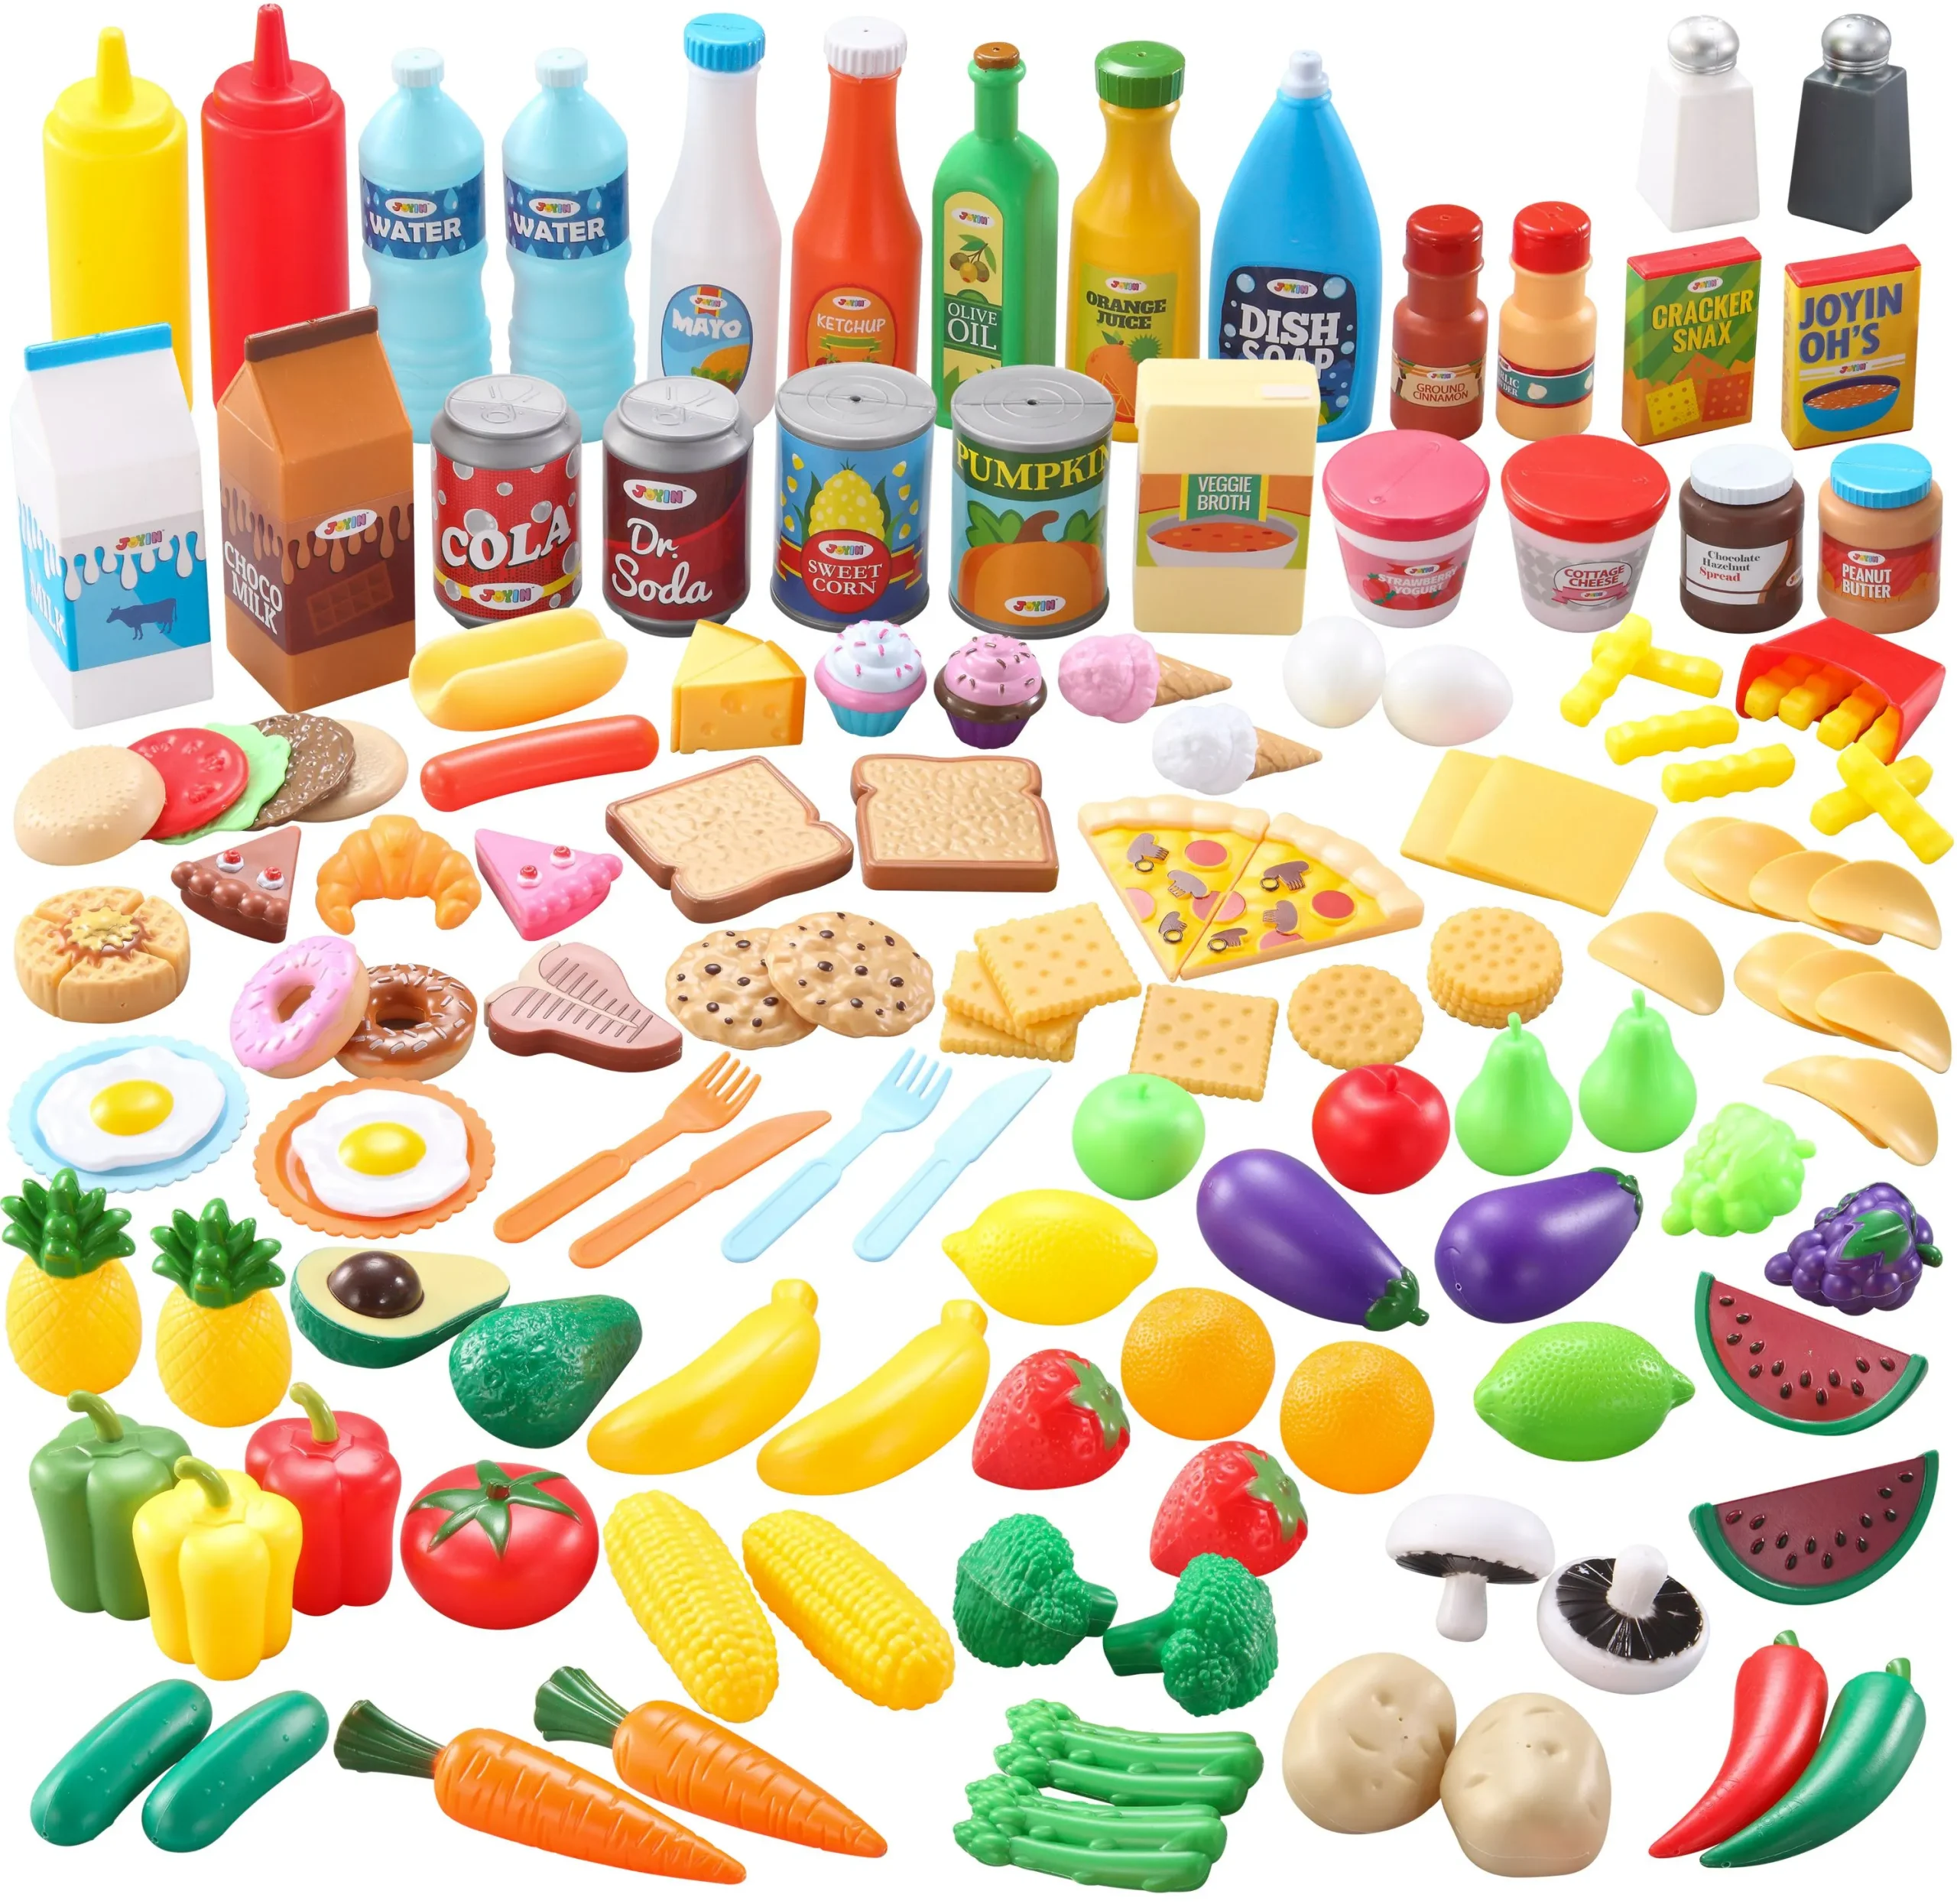 JOYIN 45 Pcs Play Food Sets for Kids Kitchen Popular Grocery Store Play Food Pretend Play Toy Set for Kids Gifts for Toddlers Boys and Girls